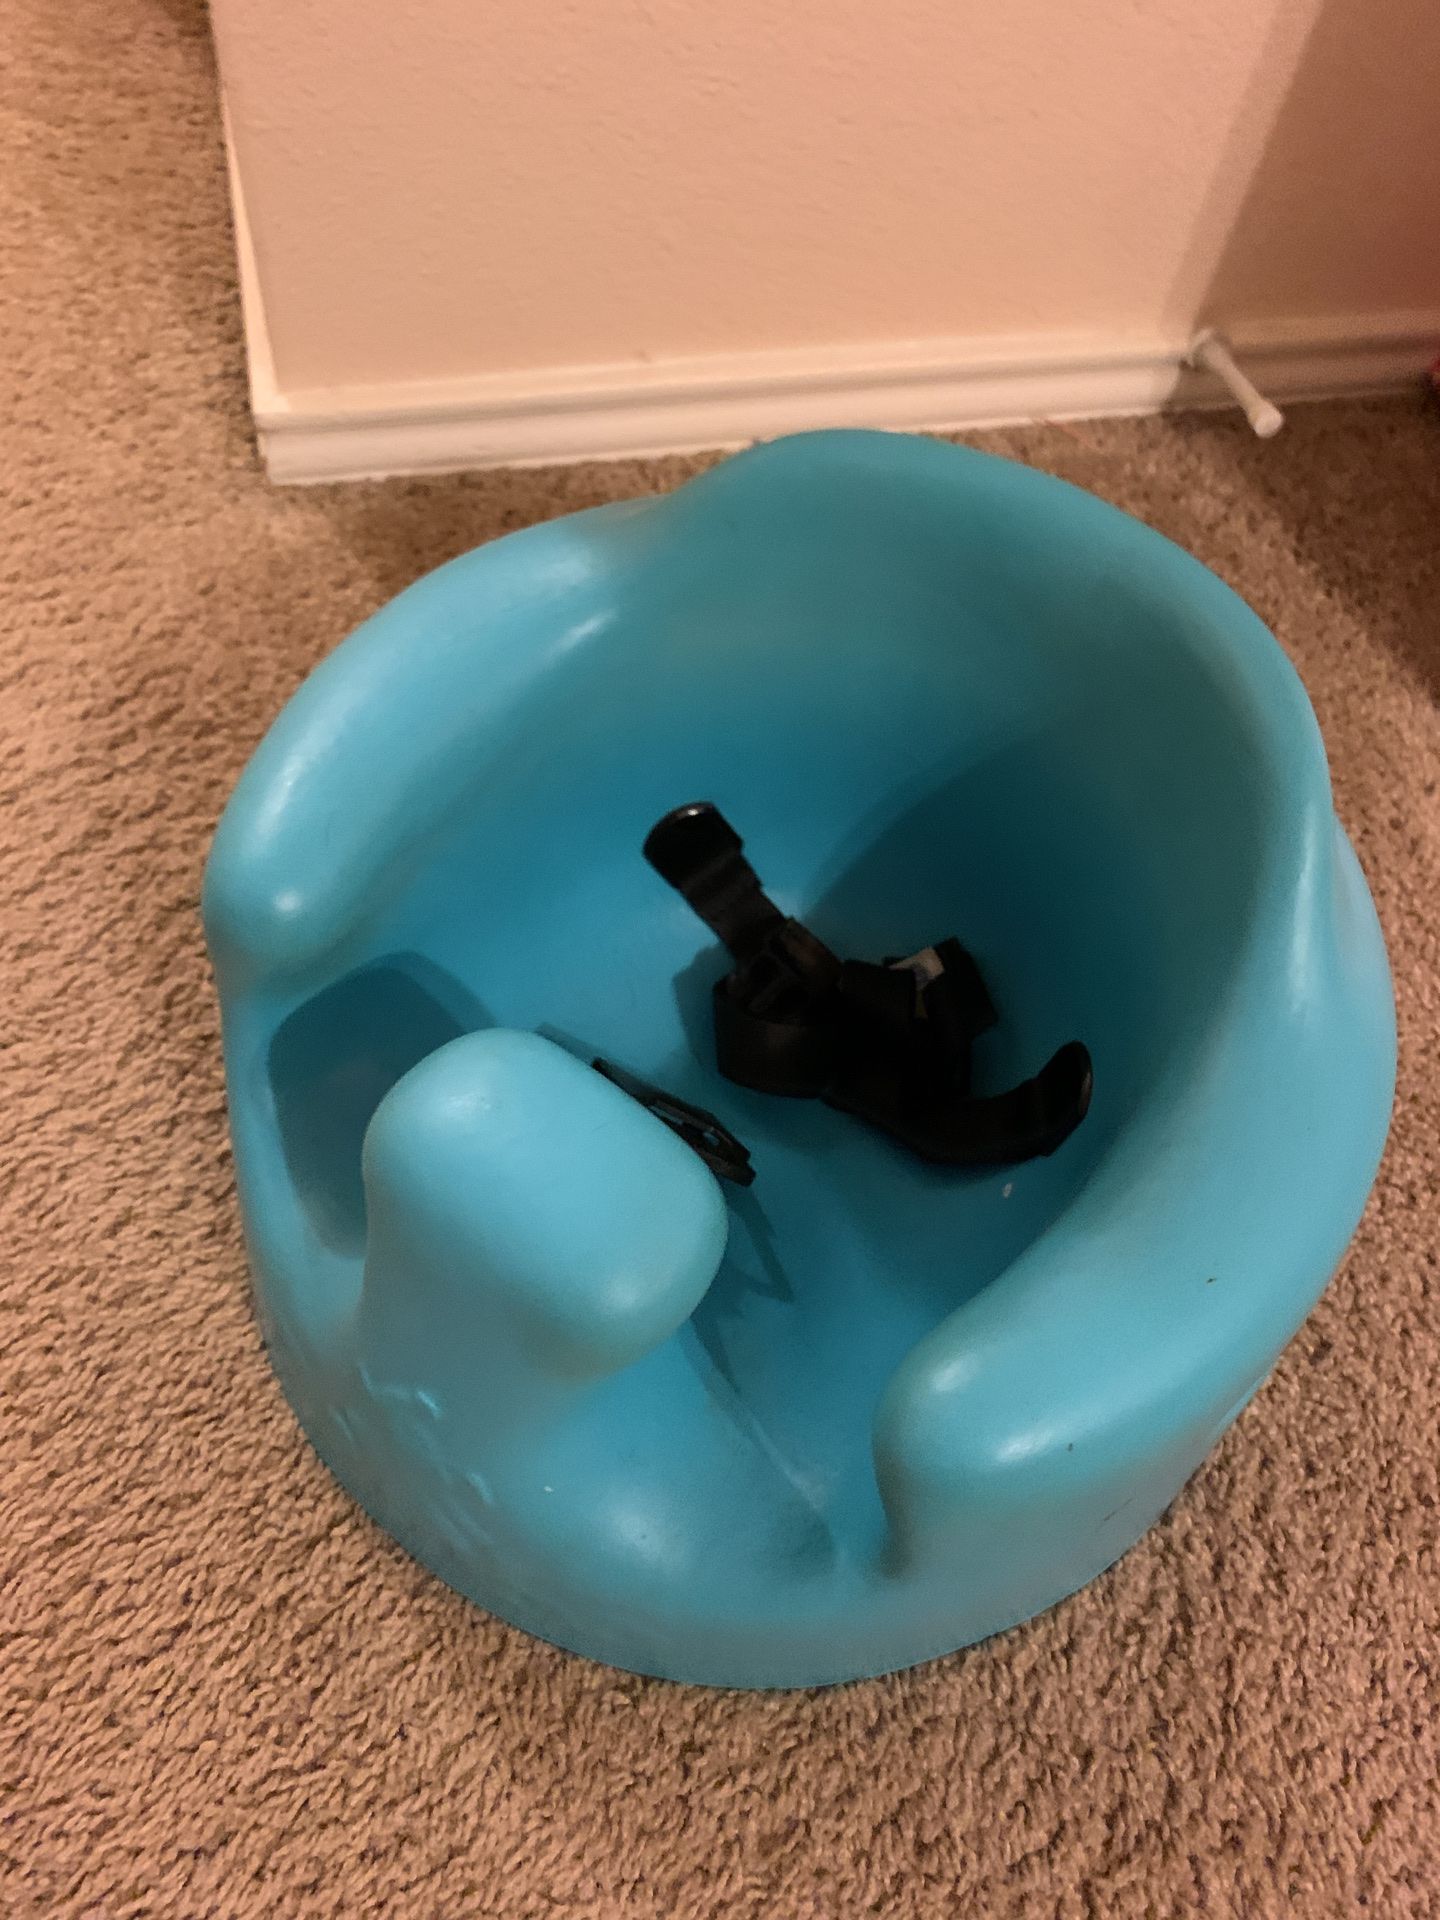 Bumbo seat / Booster baby